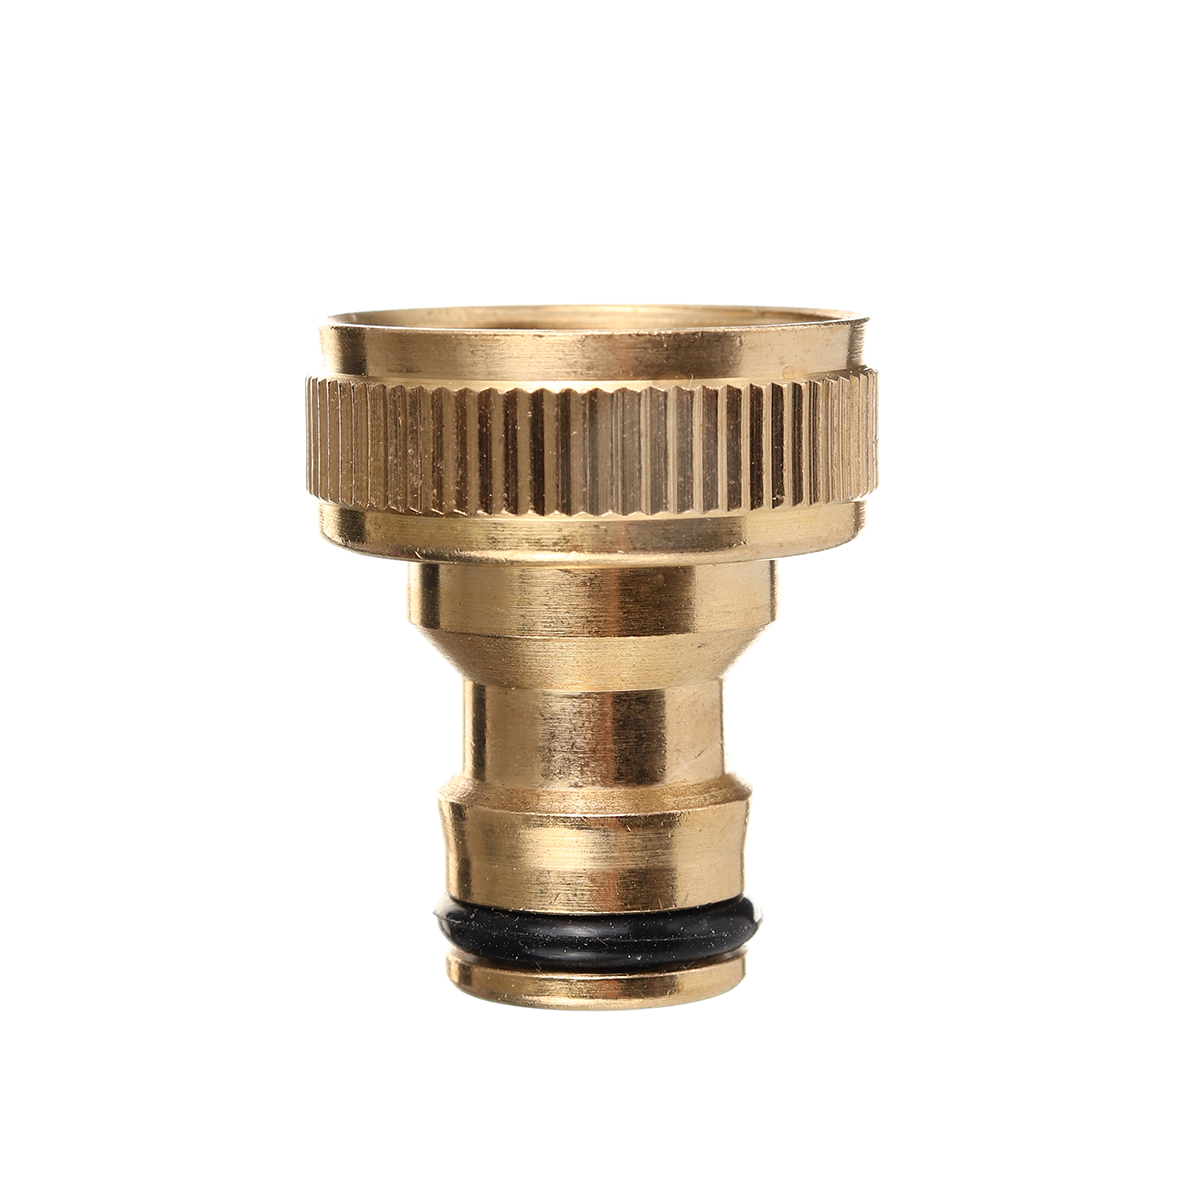 IBC-Tank-Adapter-to-12Yard-Garden-Water-Tap-Hose-Connector-Fitting-Tool-S60X6-1952469-10